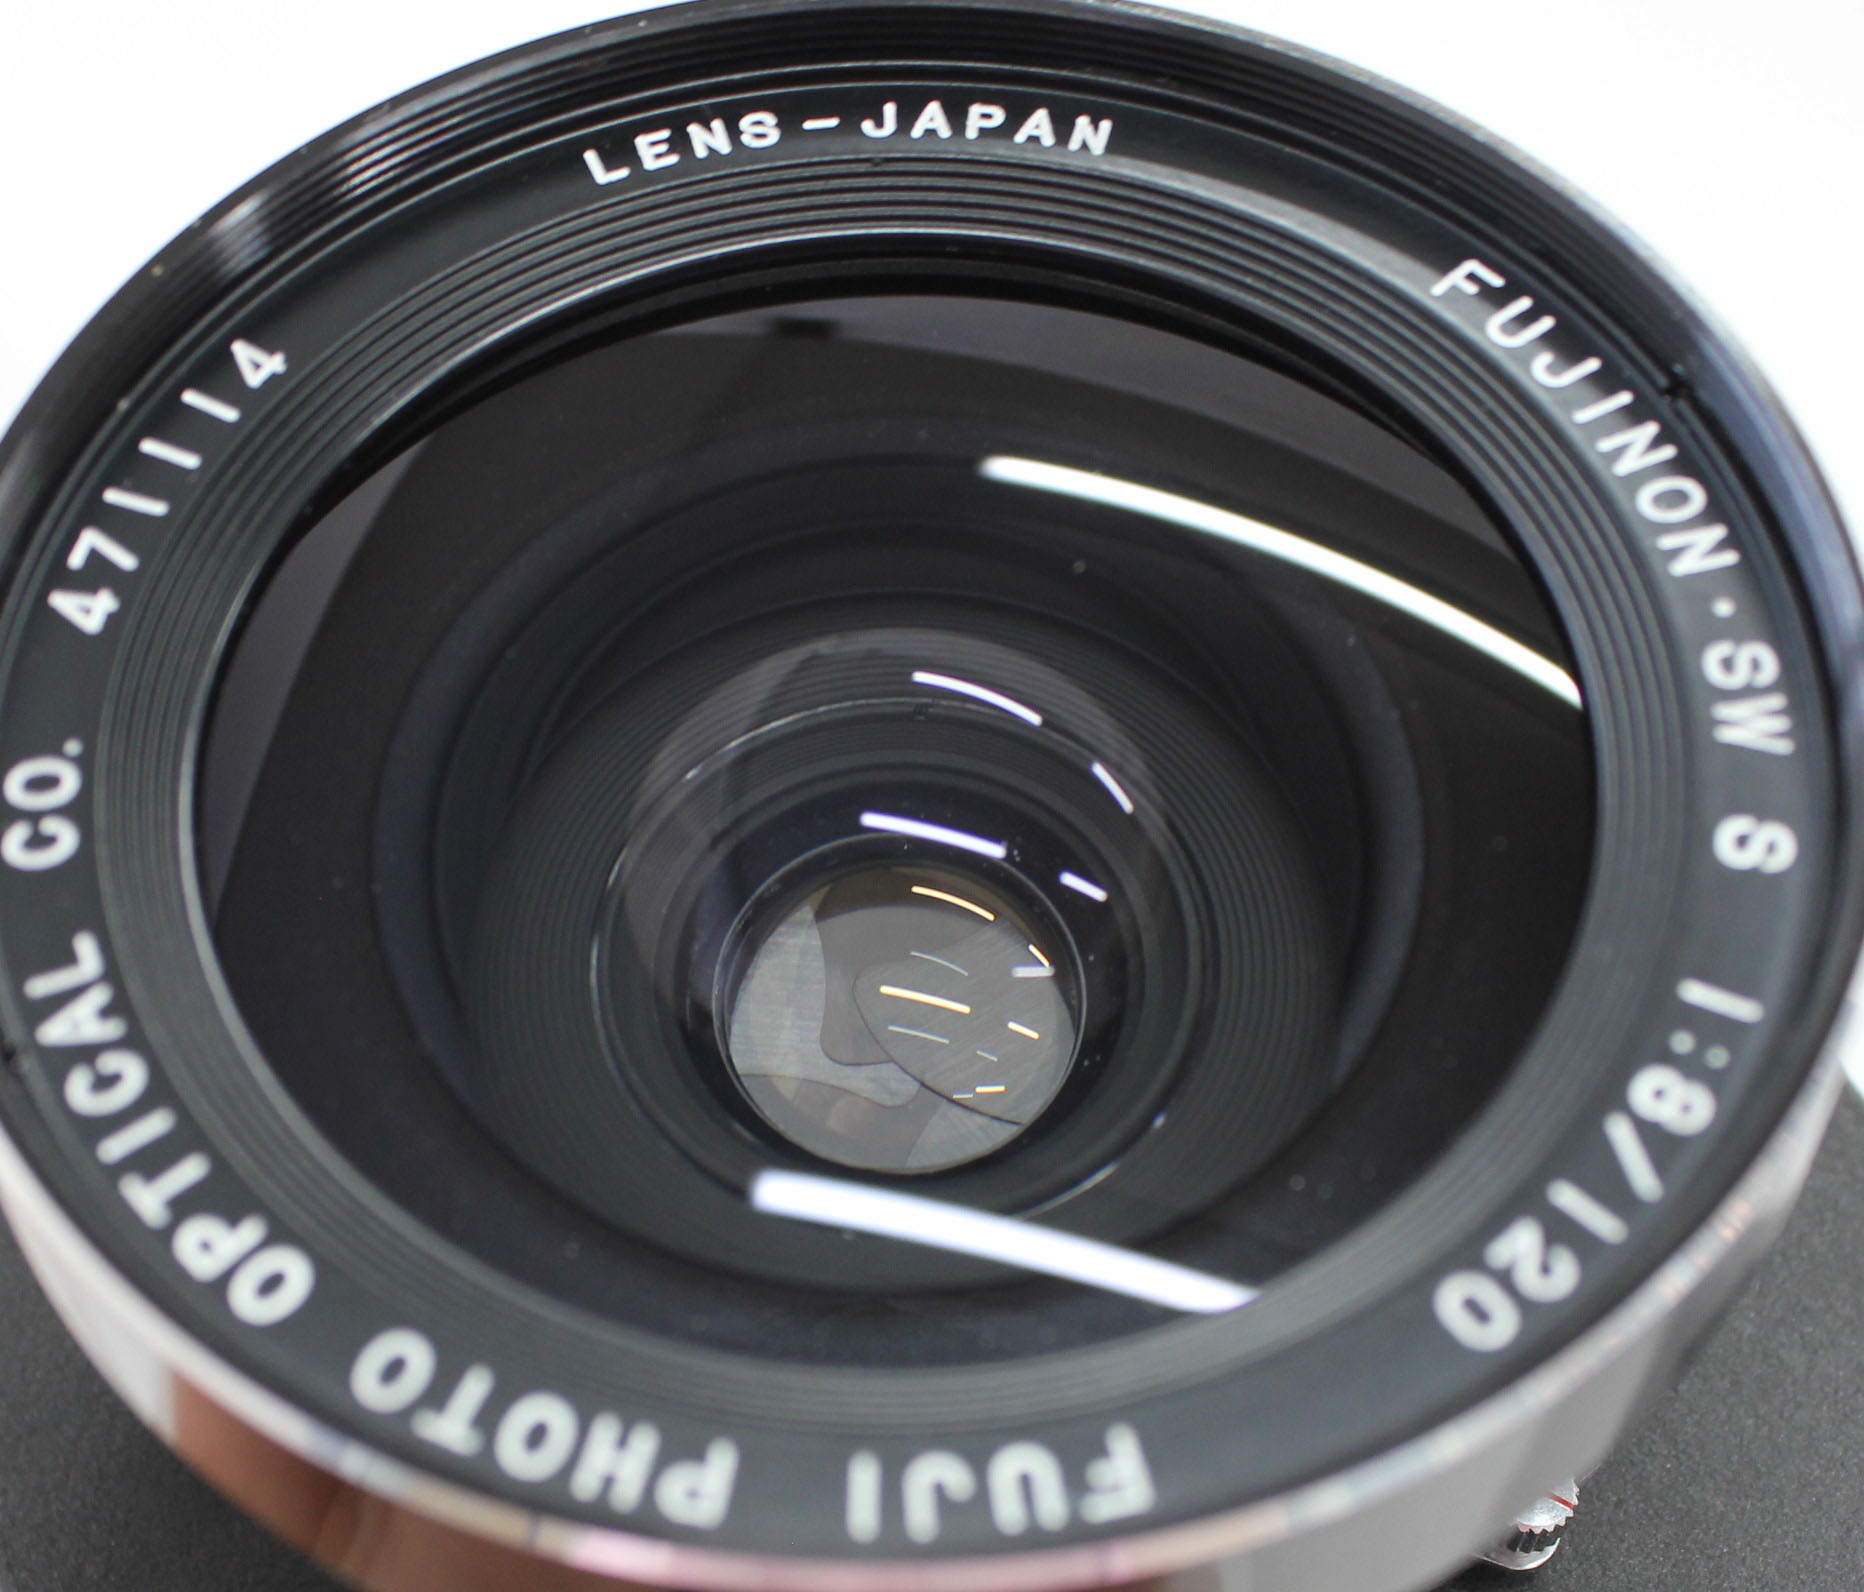 Fuji Fujinon  SW S 120mm F/8 Super Wide Angle Large Format Lens Seiko Shutter from Japan Photo 7